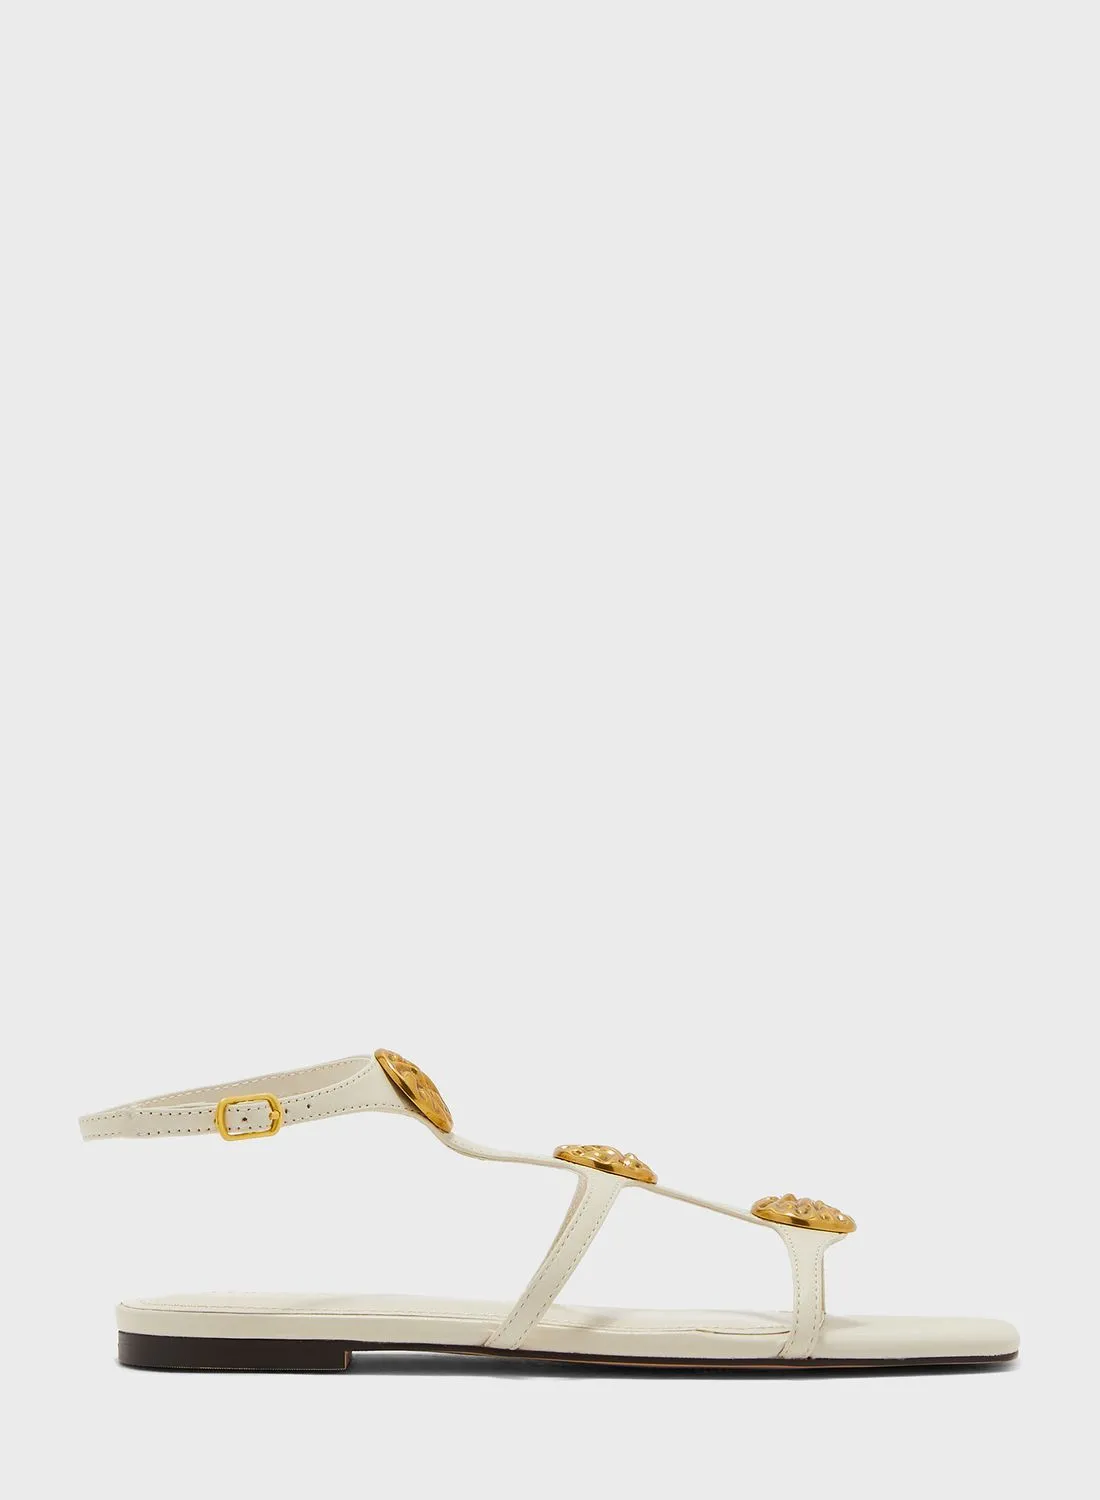 Ted Baker Radishy Gold Coin Flat Sandals